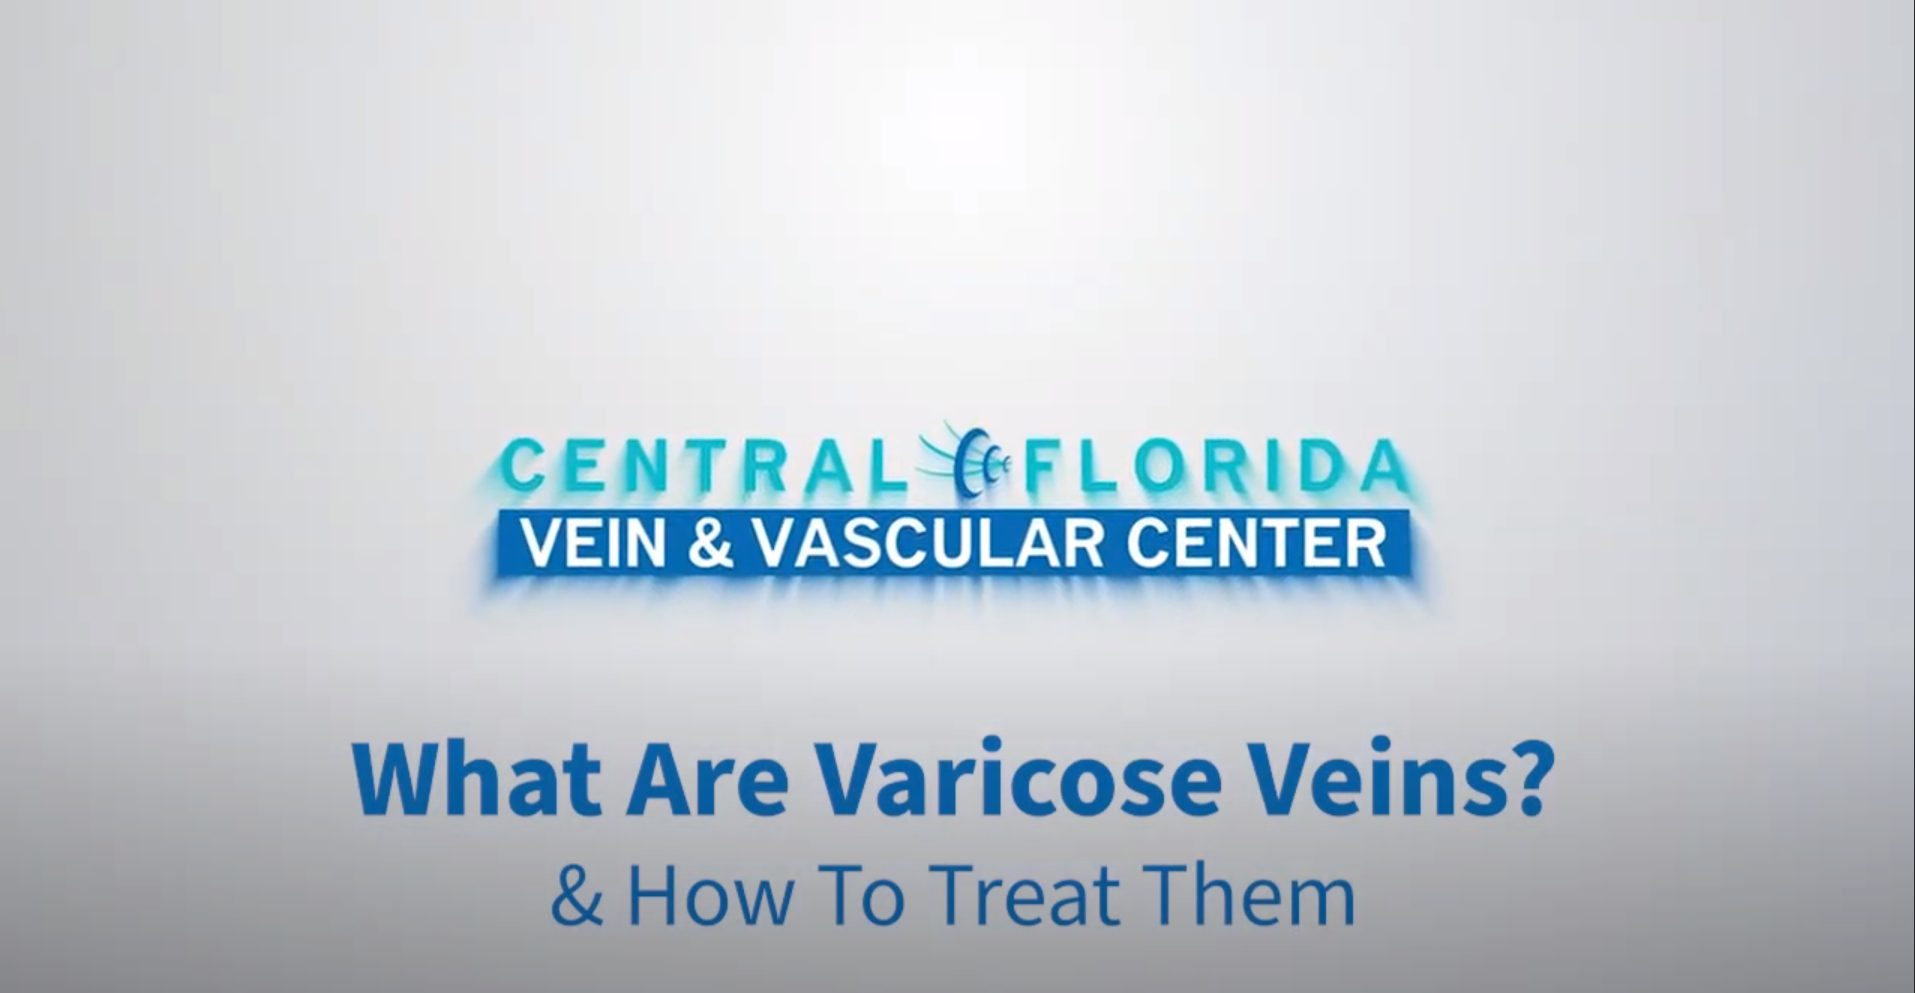 Varicose Vein Guide  Varicose Vein Causes, Treatment & More